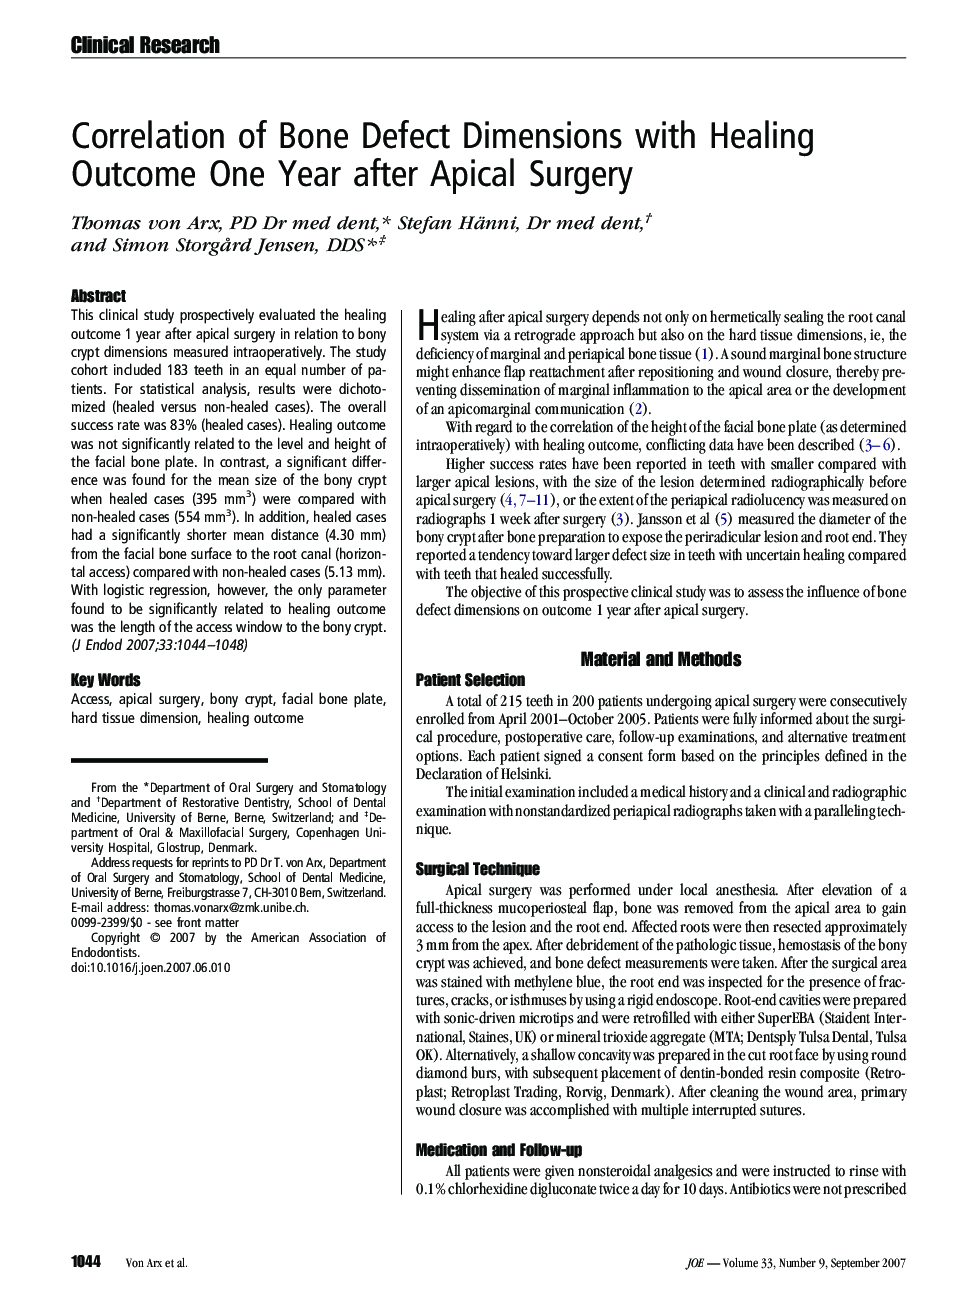 Correlation of Bone Defect Dimensions with Healing Outcome One Year after Apical Surgery